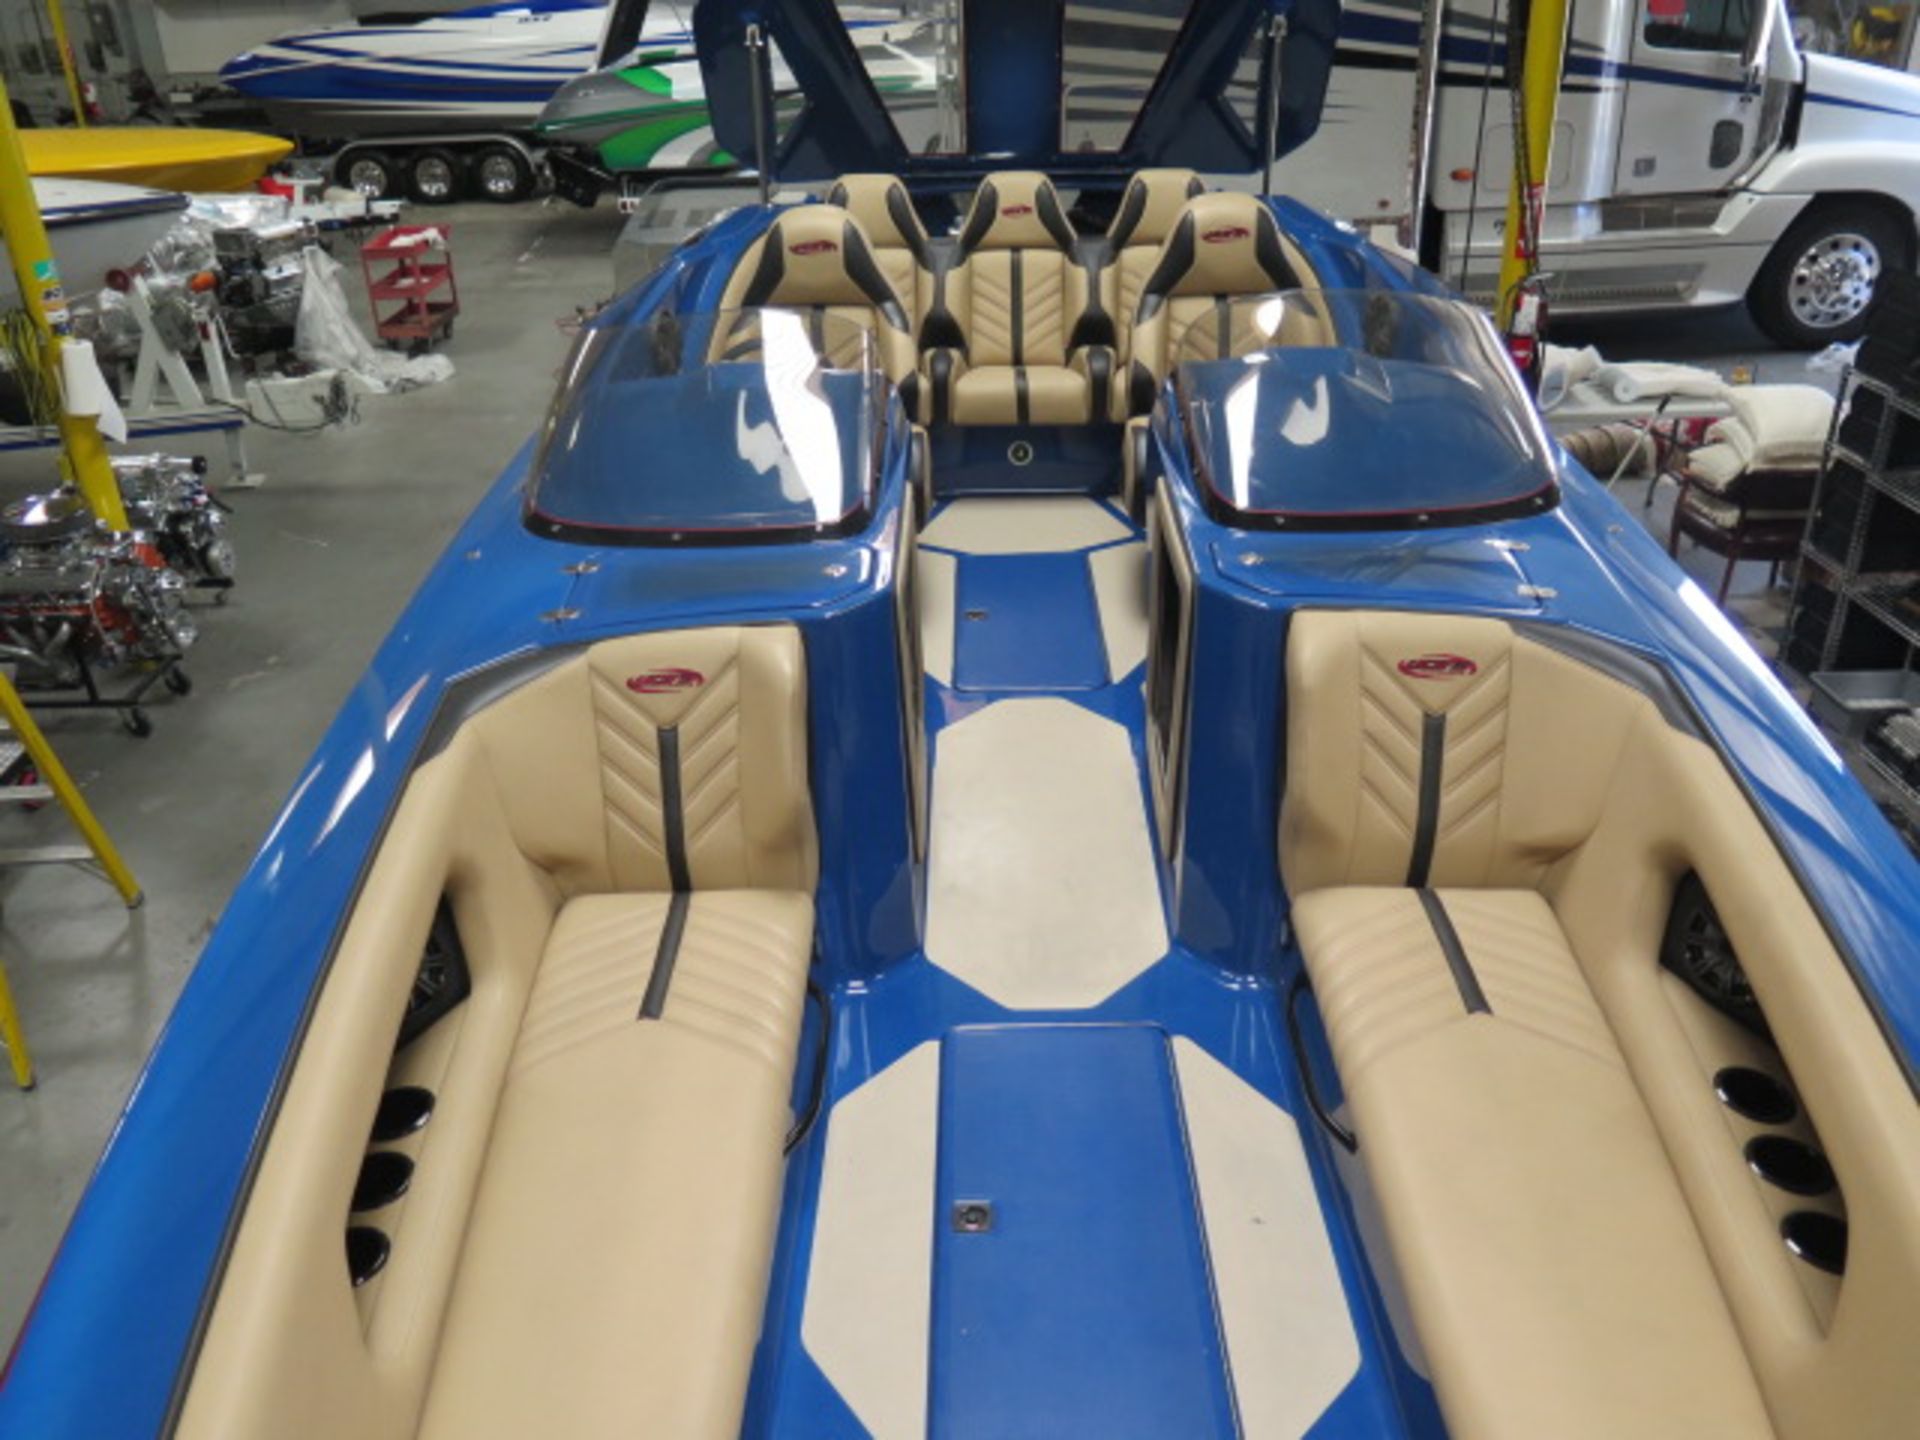 2020 28 Ultra Deck Boat w/ Boostpower 550 EFI (23 Hrs), Inco SCX Drive, Deluxe Options, SOLD AS IS - Image 16 of 58